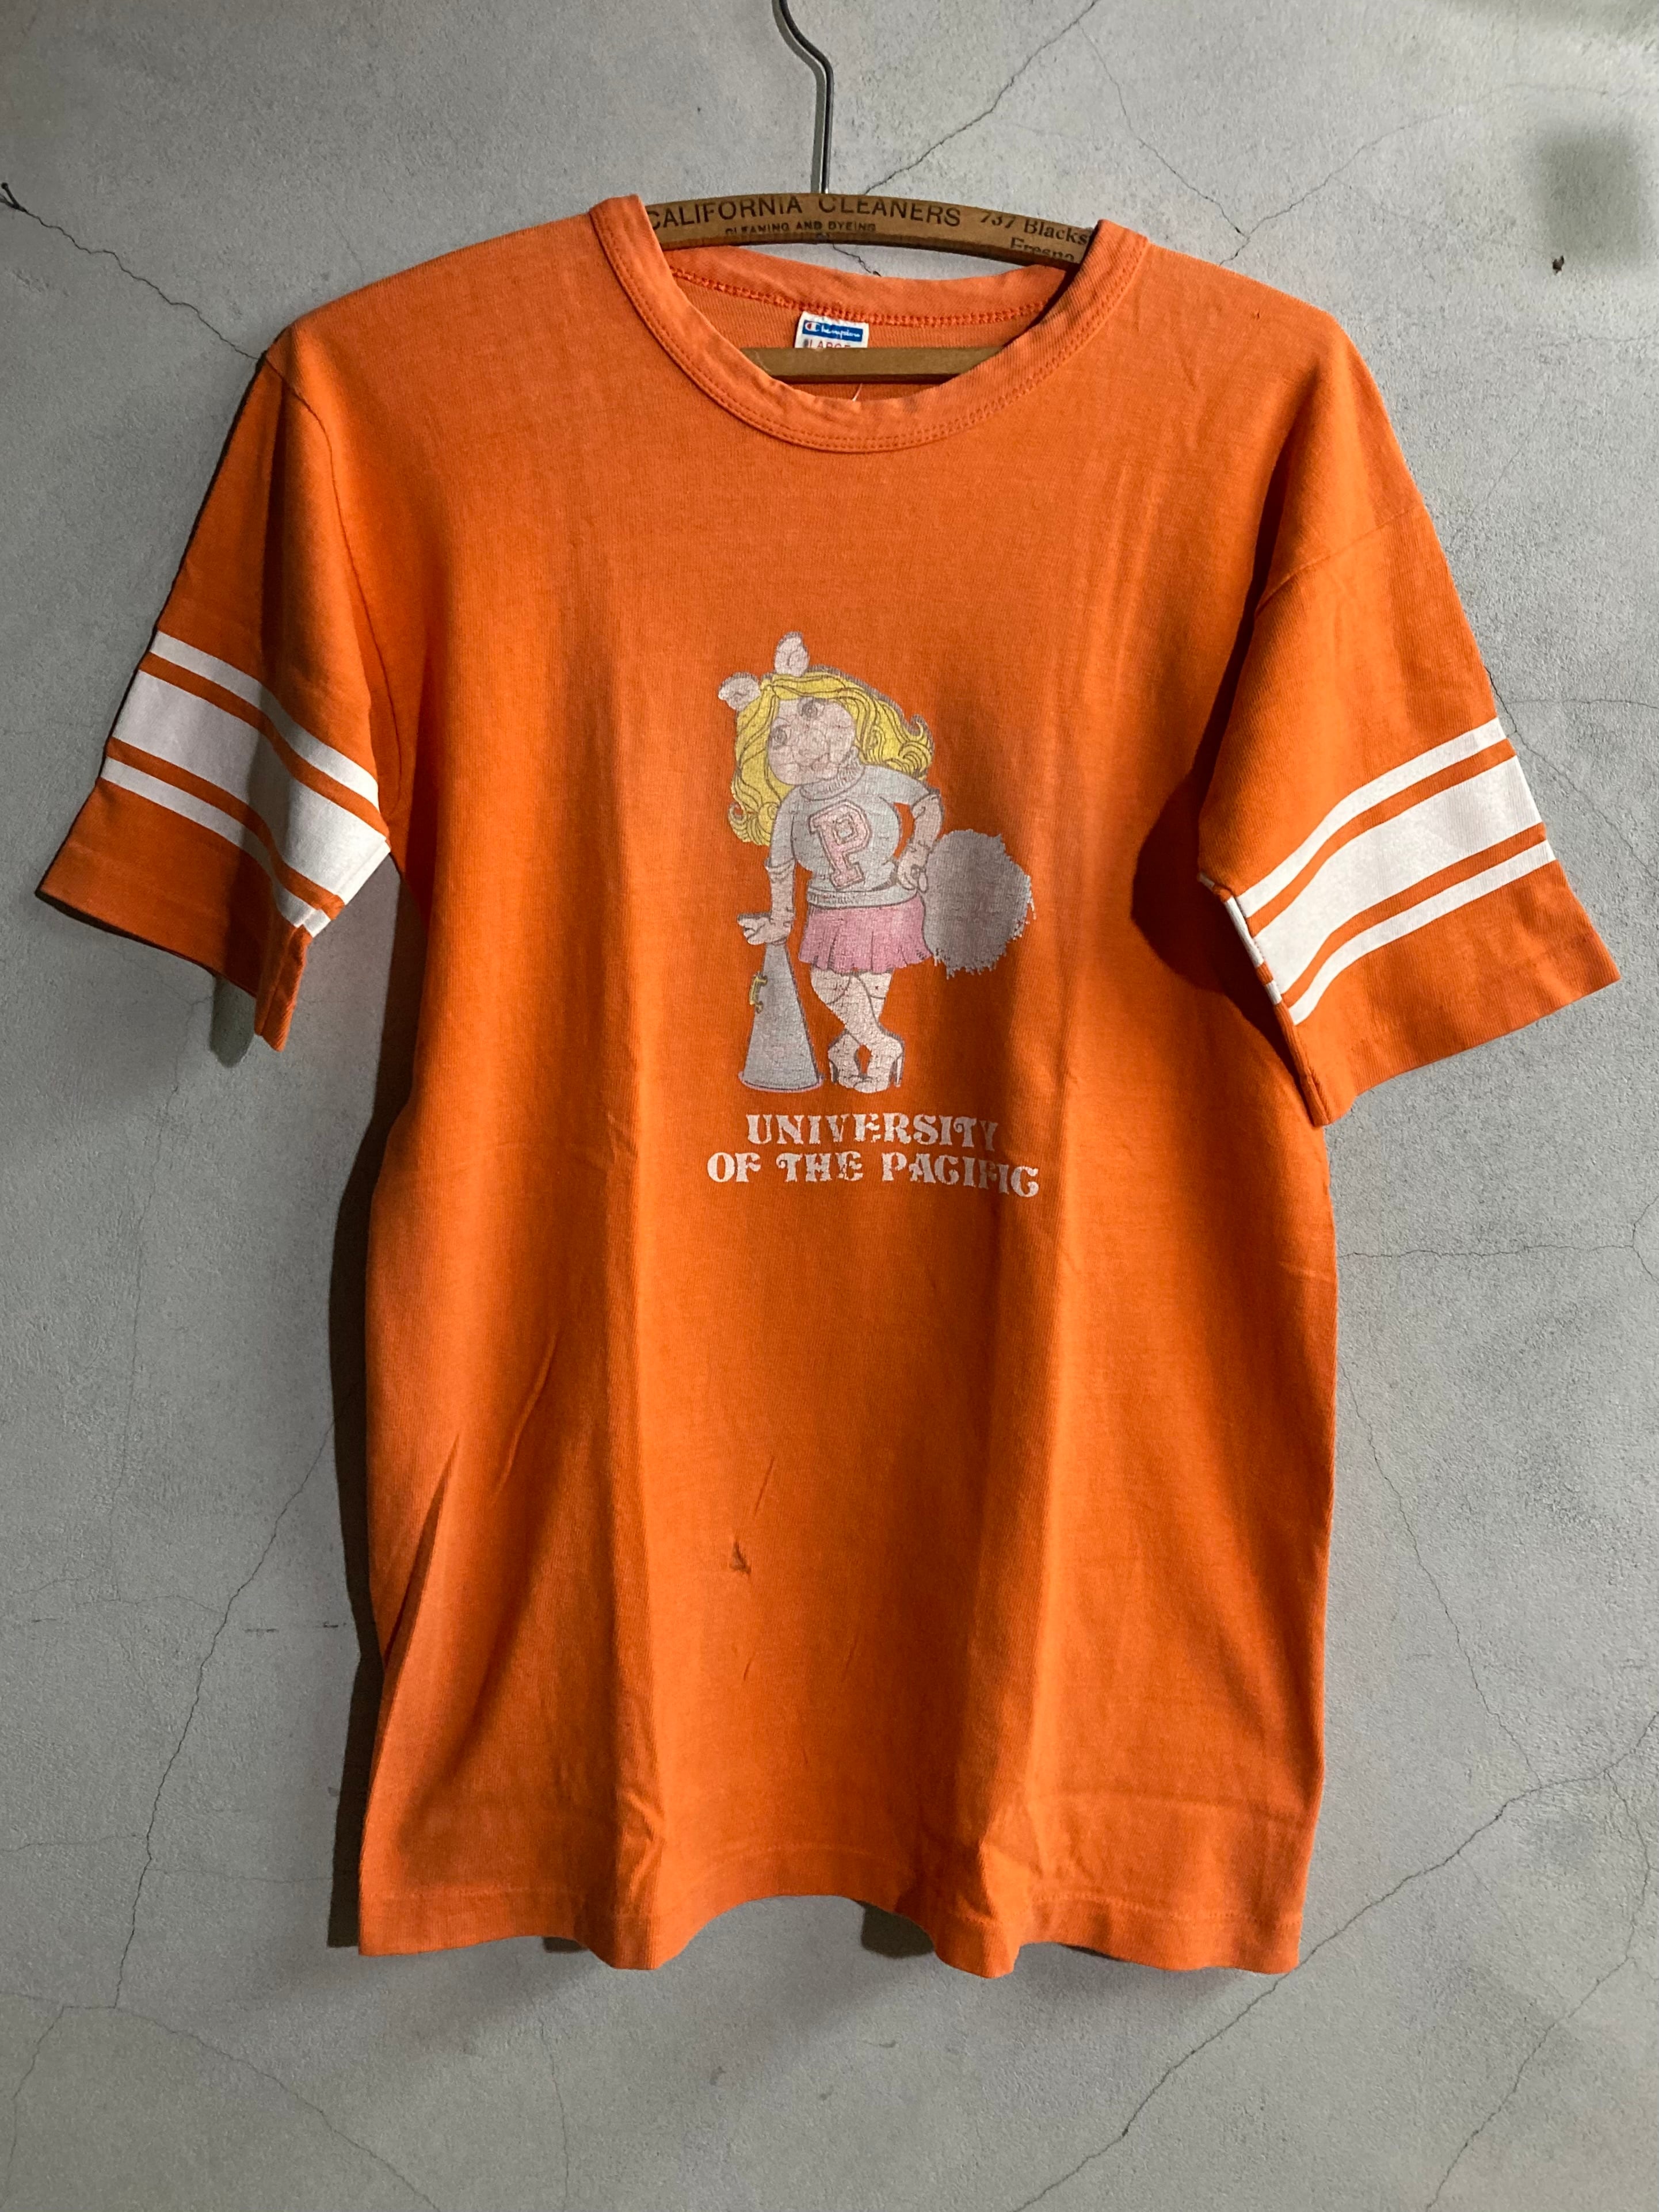 70s UNIVERSITY OF THE PACIFIC T-SHIRT